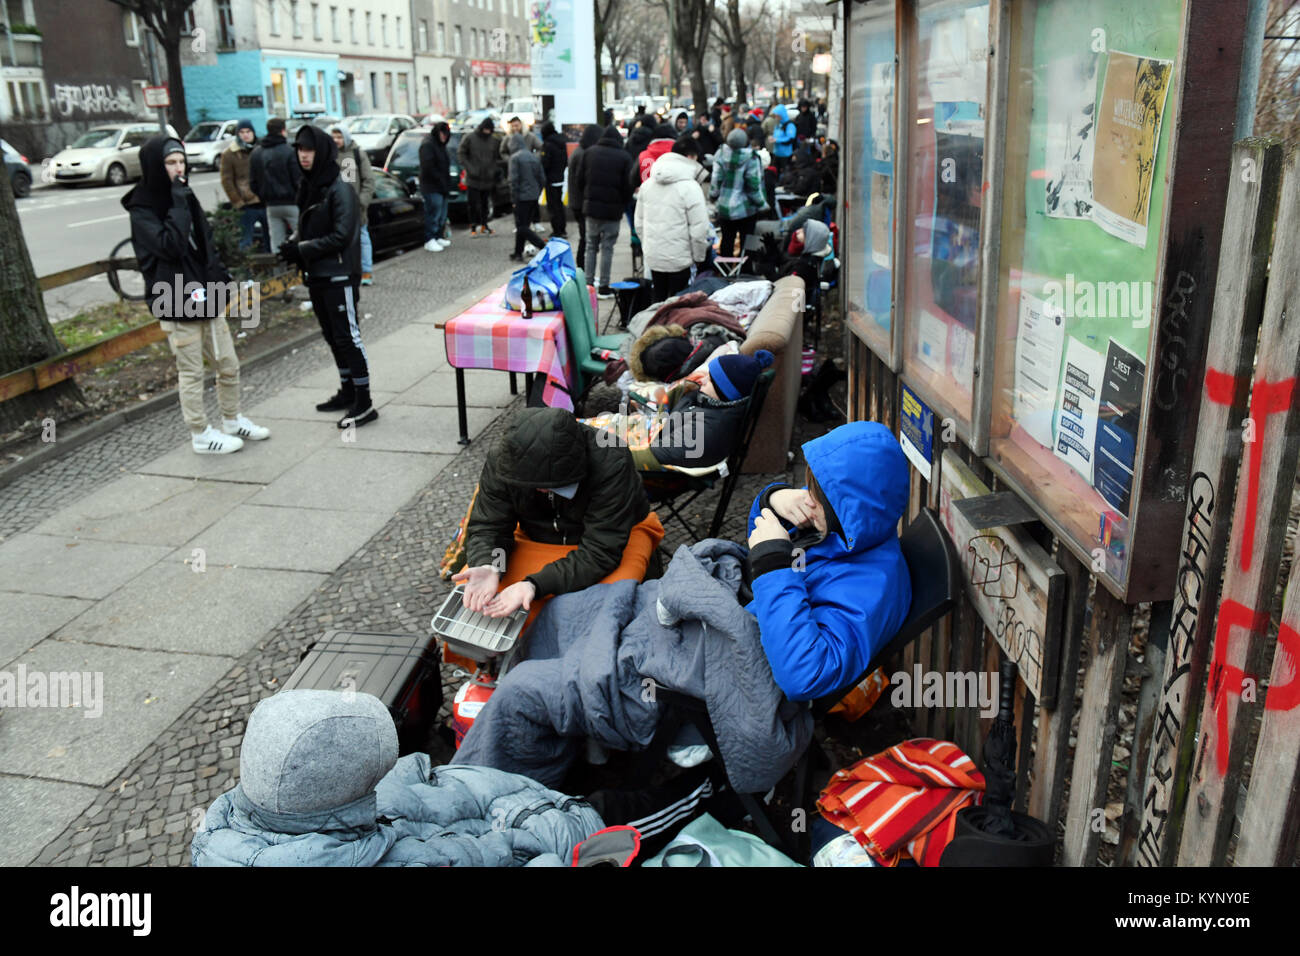 Several hundred people camp in front of a shoe store which is to sell the  Adidas sneaker with integrated BVG (Berlin Transport Company) annual ticket  in Berlin, Germany, 15 January 2018. The